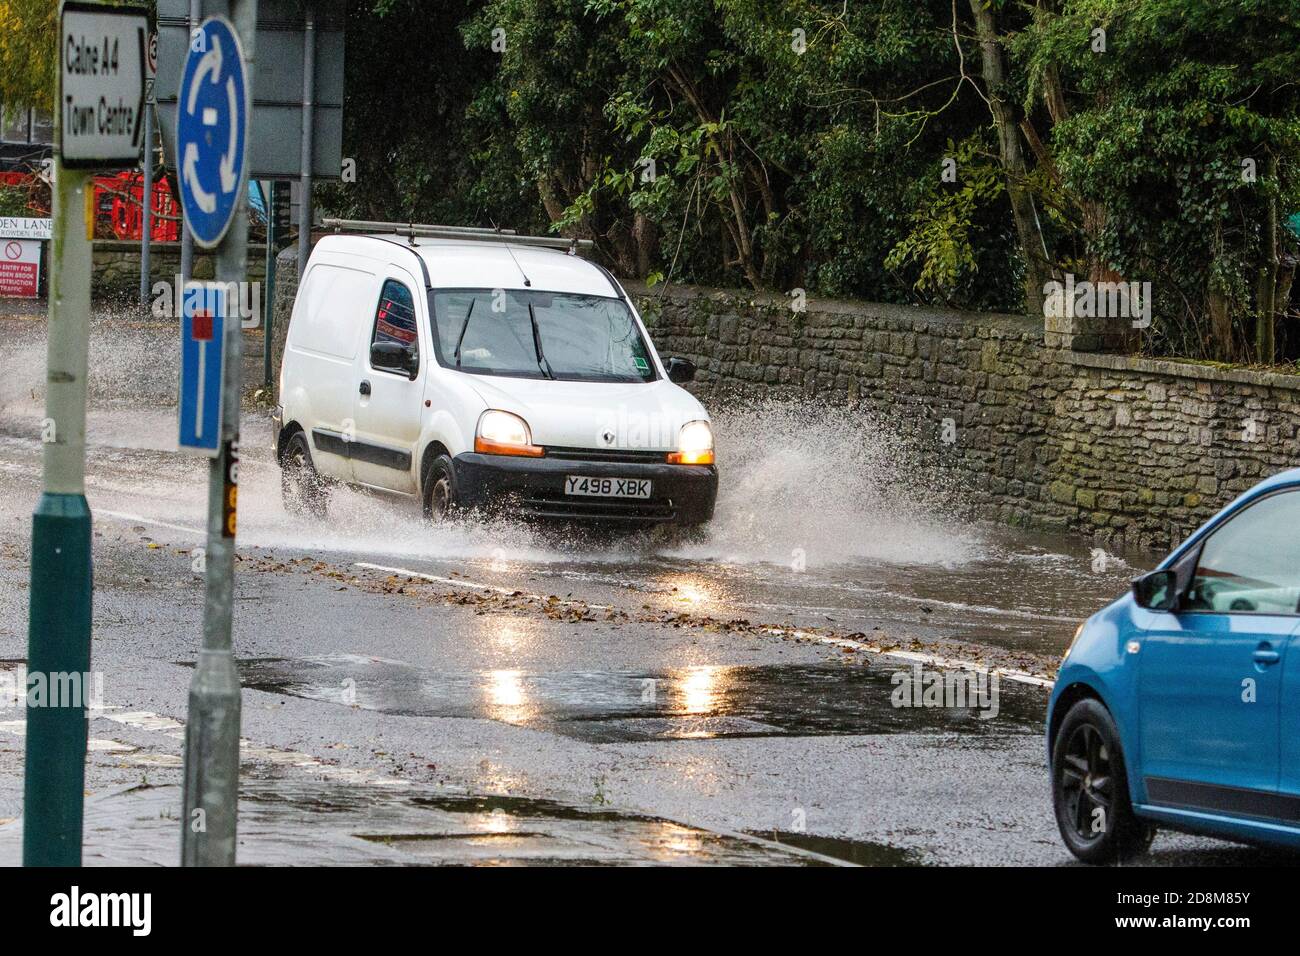 Chippenham, Wiltshire, UK. 31st October, 2020. As heavy showers affect many parts of the UK, drivers are pictured braving very heavy rain in Chippenham, Wiltshire. Credit: Lynchpics/Alamy Live News Stock Photo